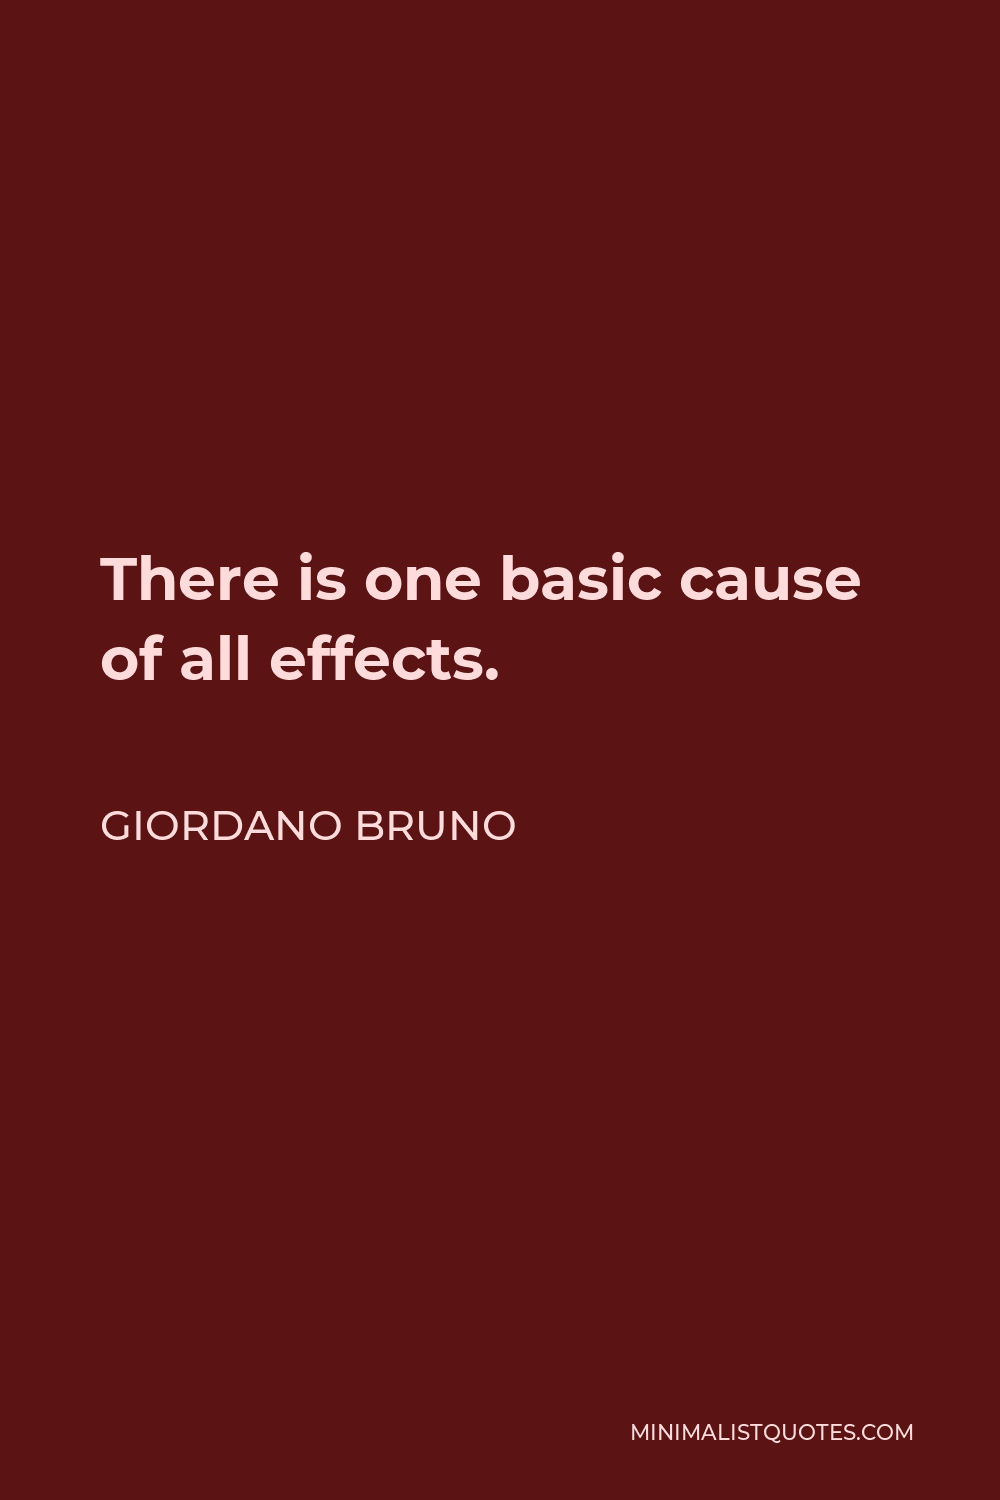 Giordano Bruno Quote - There is one basic cause of all effects.